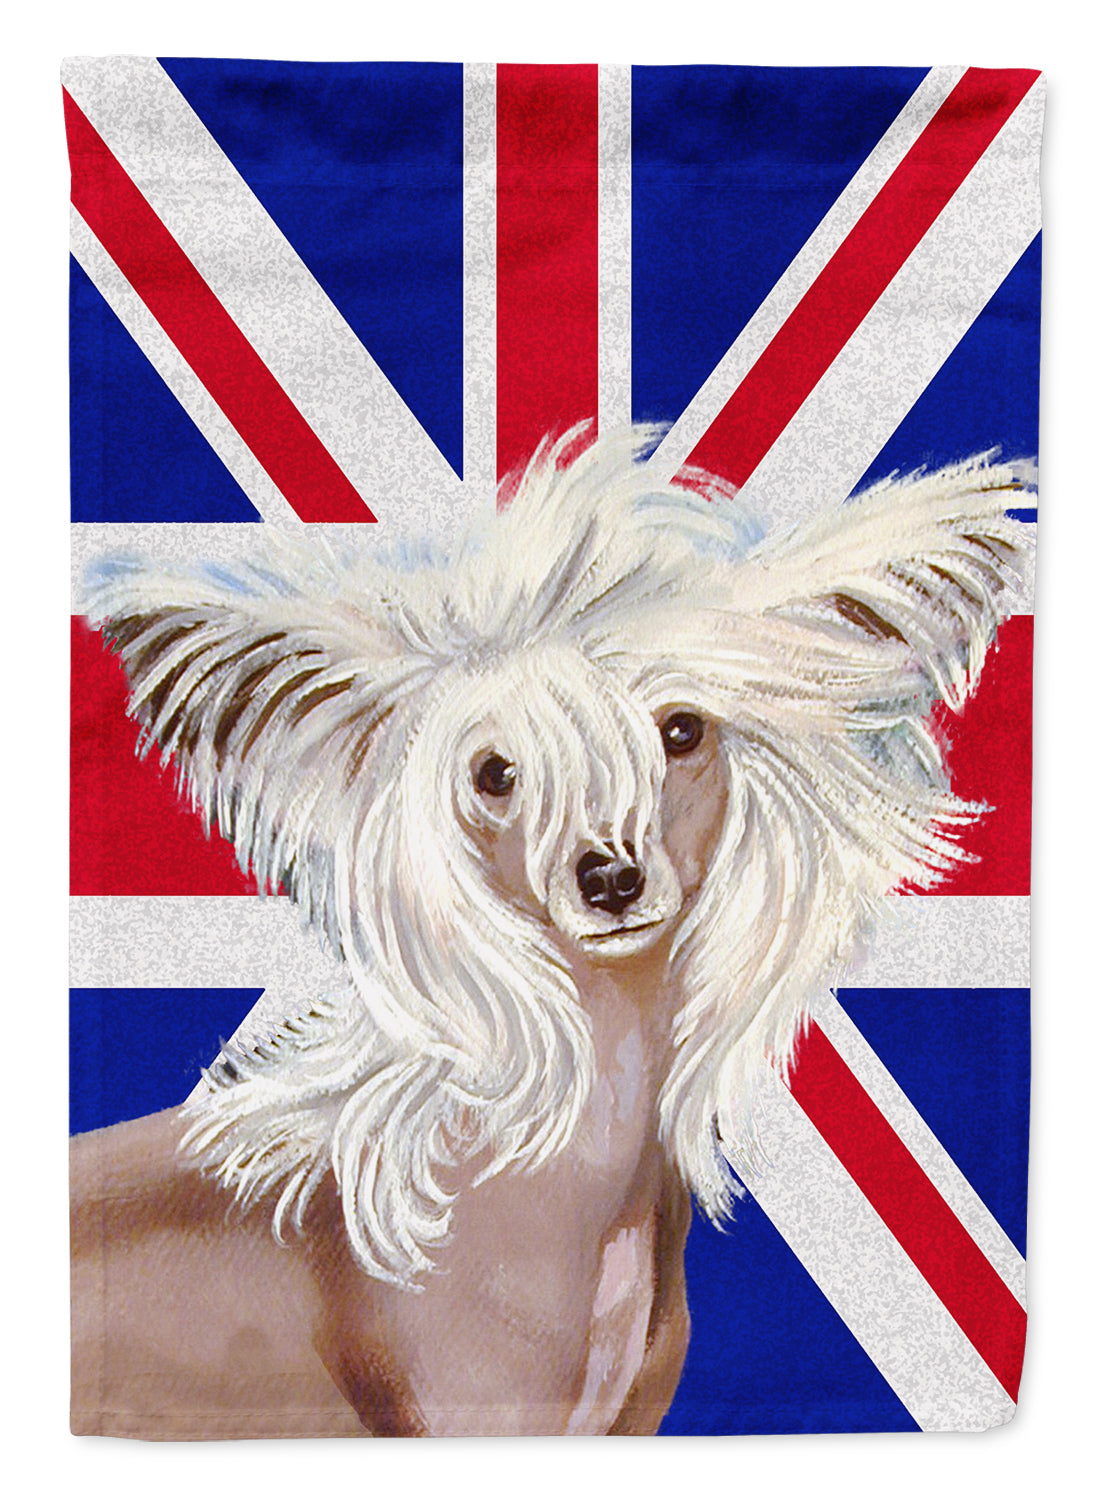 Chinese Crested with English Union Jack British Flag Flag Garden Size  the-store.com.